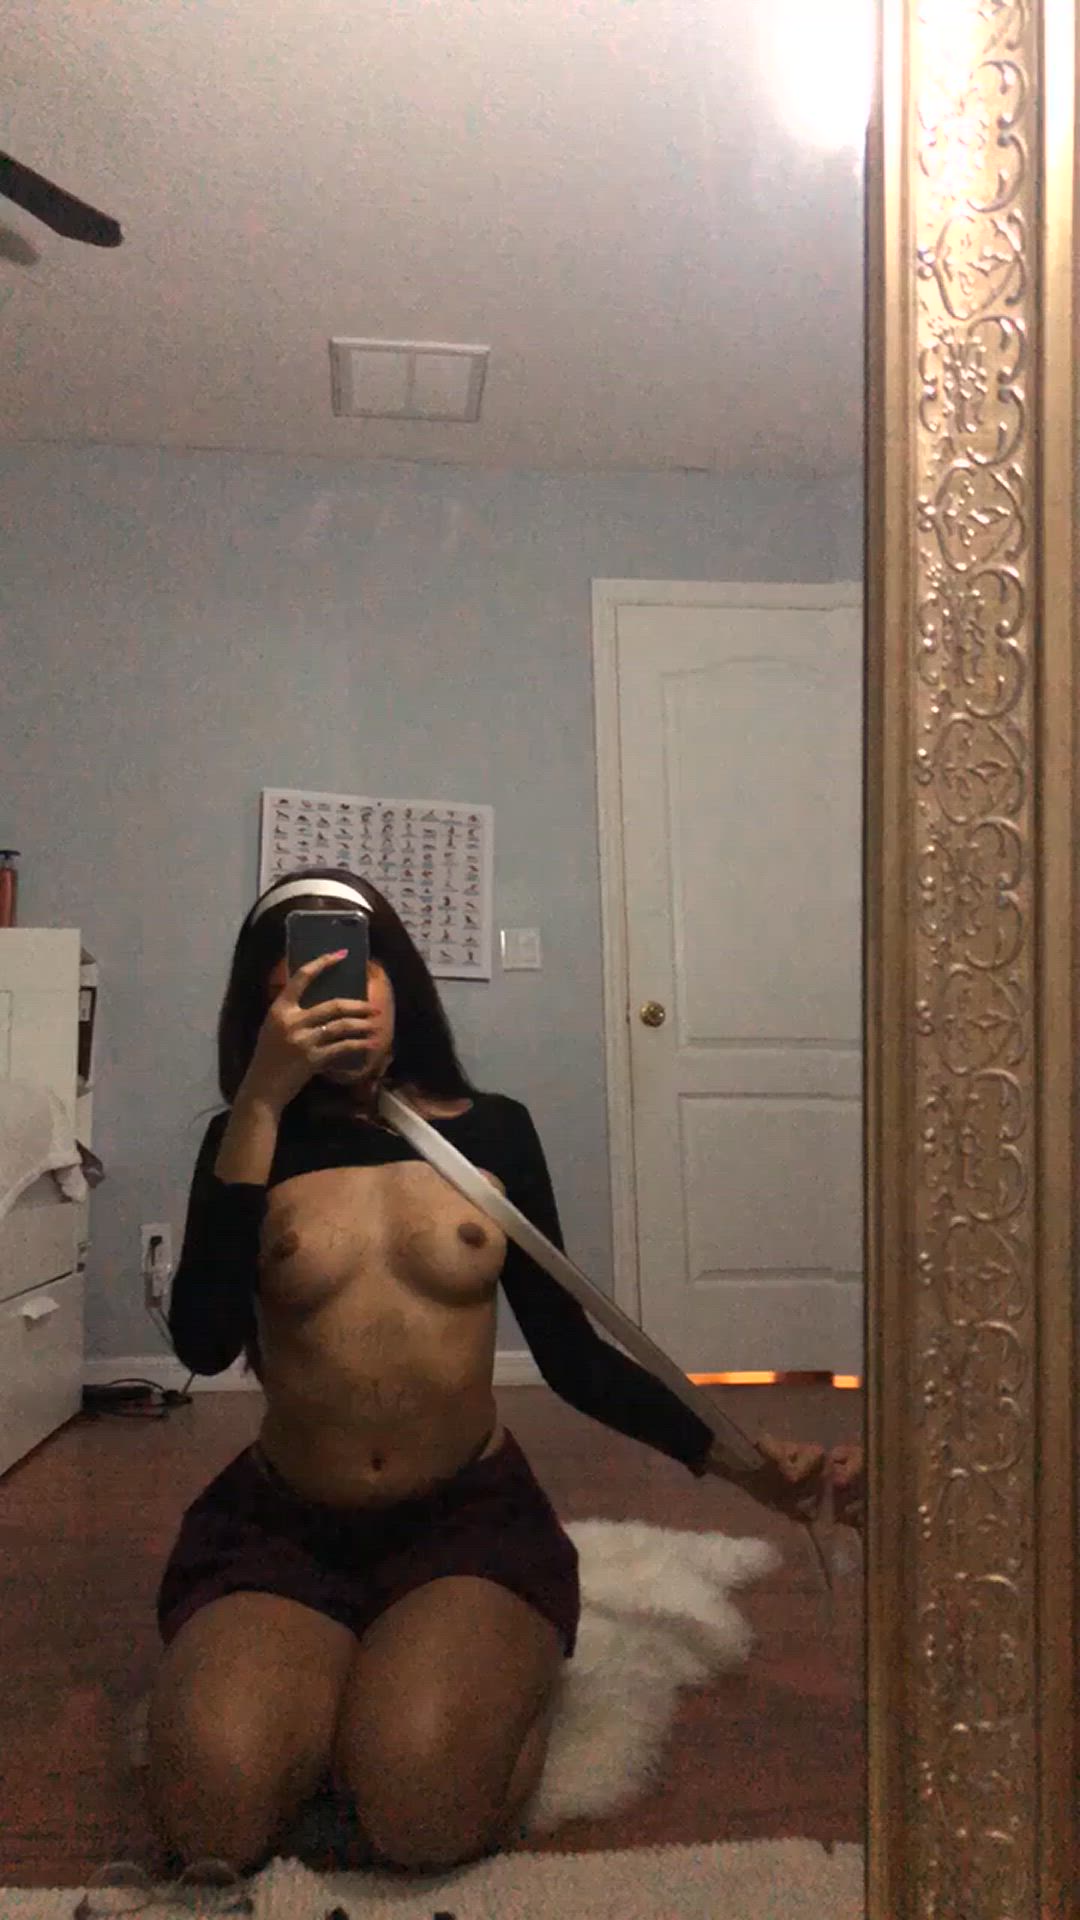 Amateur porn video with onlyfans model nsfwbunnygirll <strong>@bunnygirllx</strong>